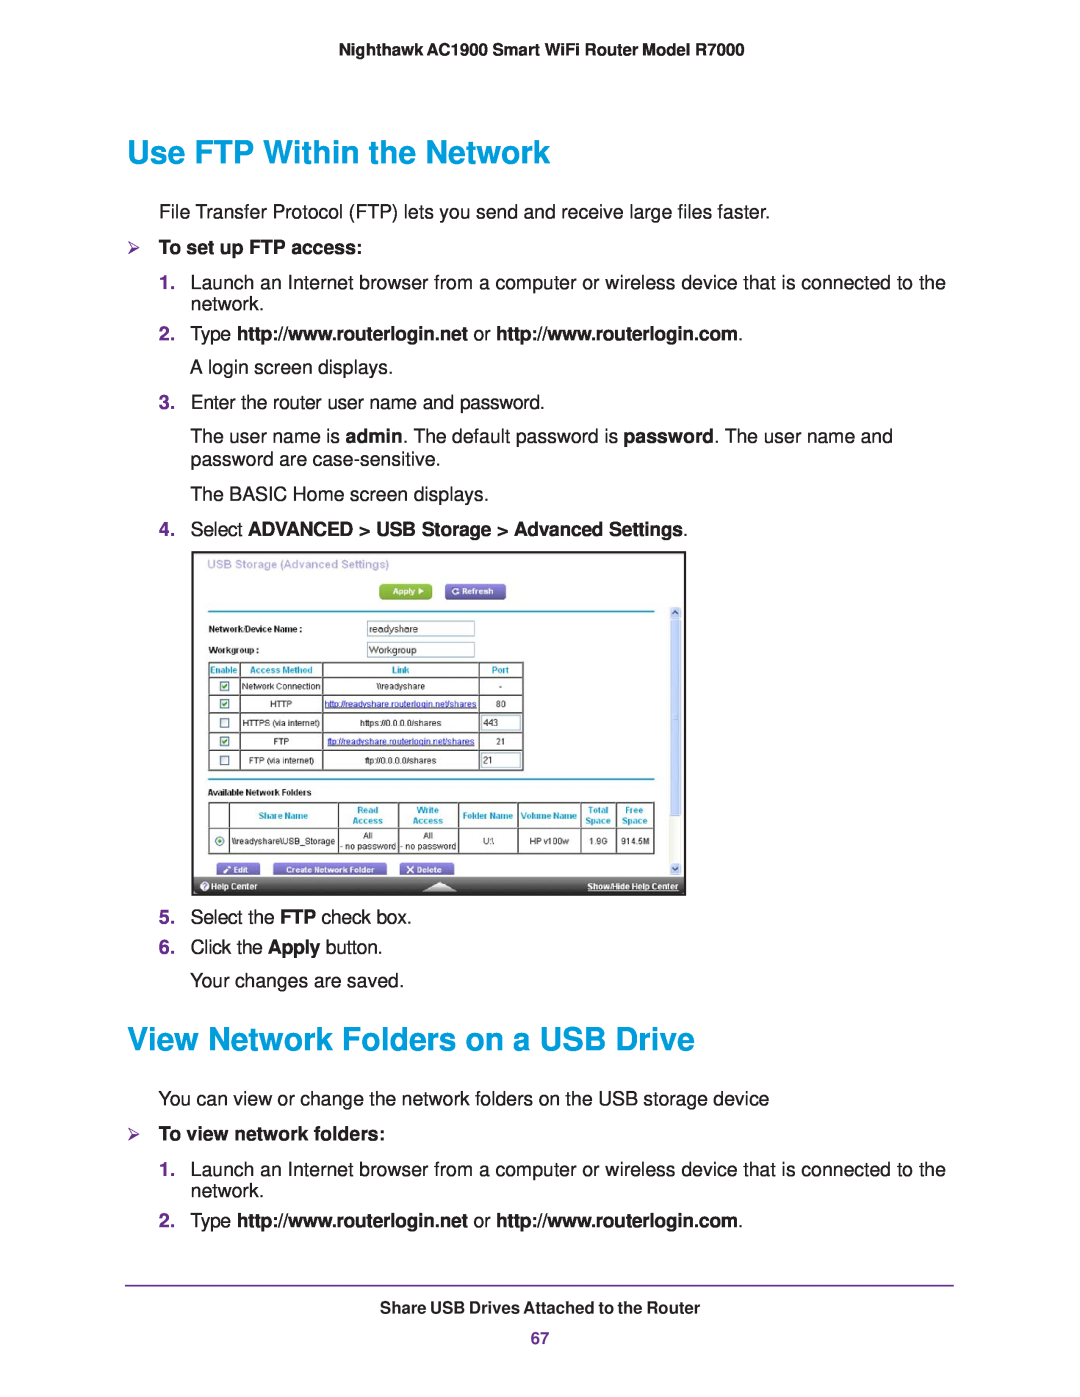 NETGEAR R7000 user manual Use FTP Within the Network, View Network Folders on a USB Drive,  To set up FTP access 